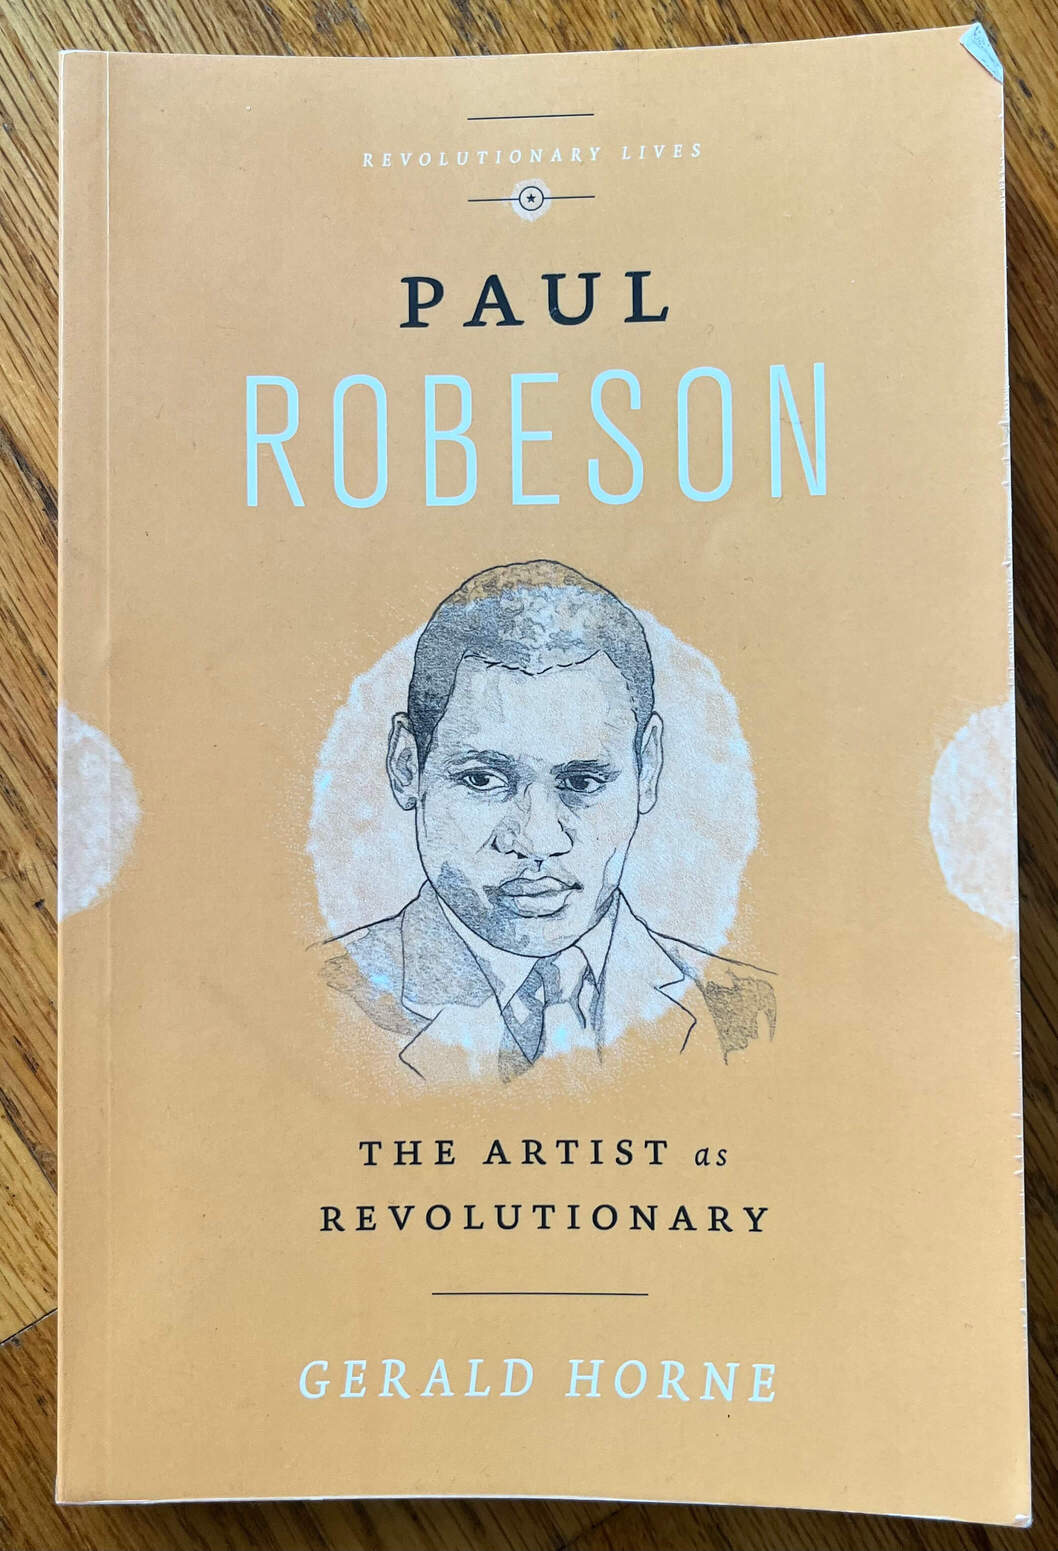 “Paul Robeson: The Artist and Revolutionary” by Gerald Horne.